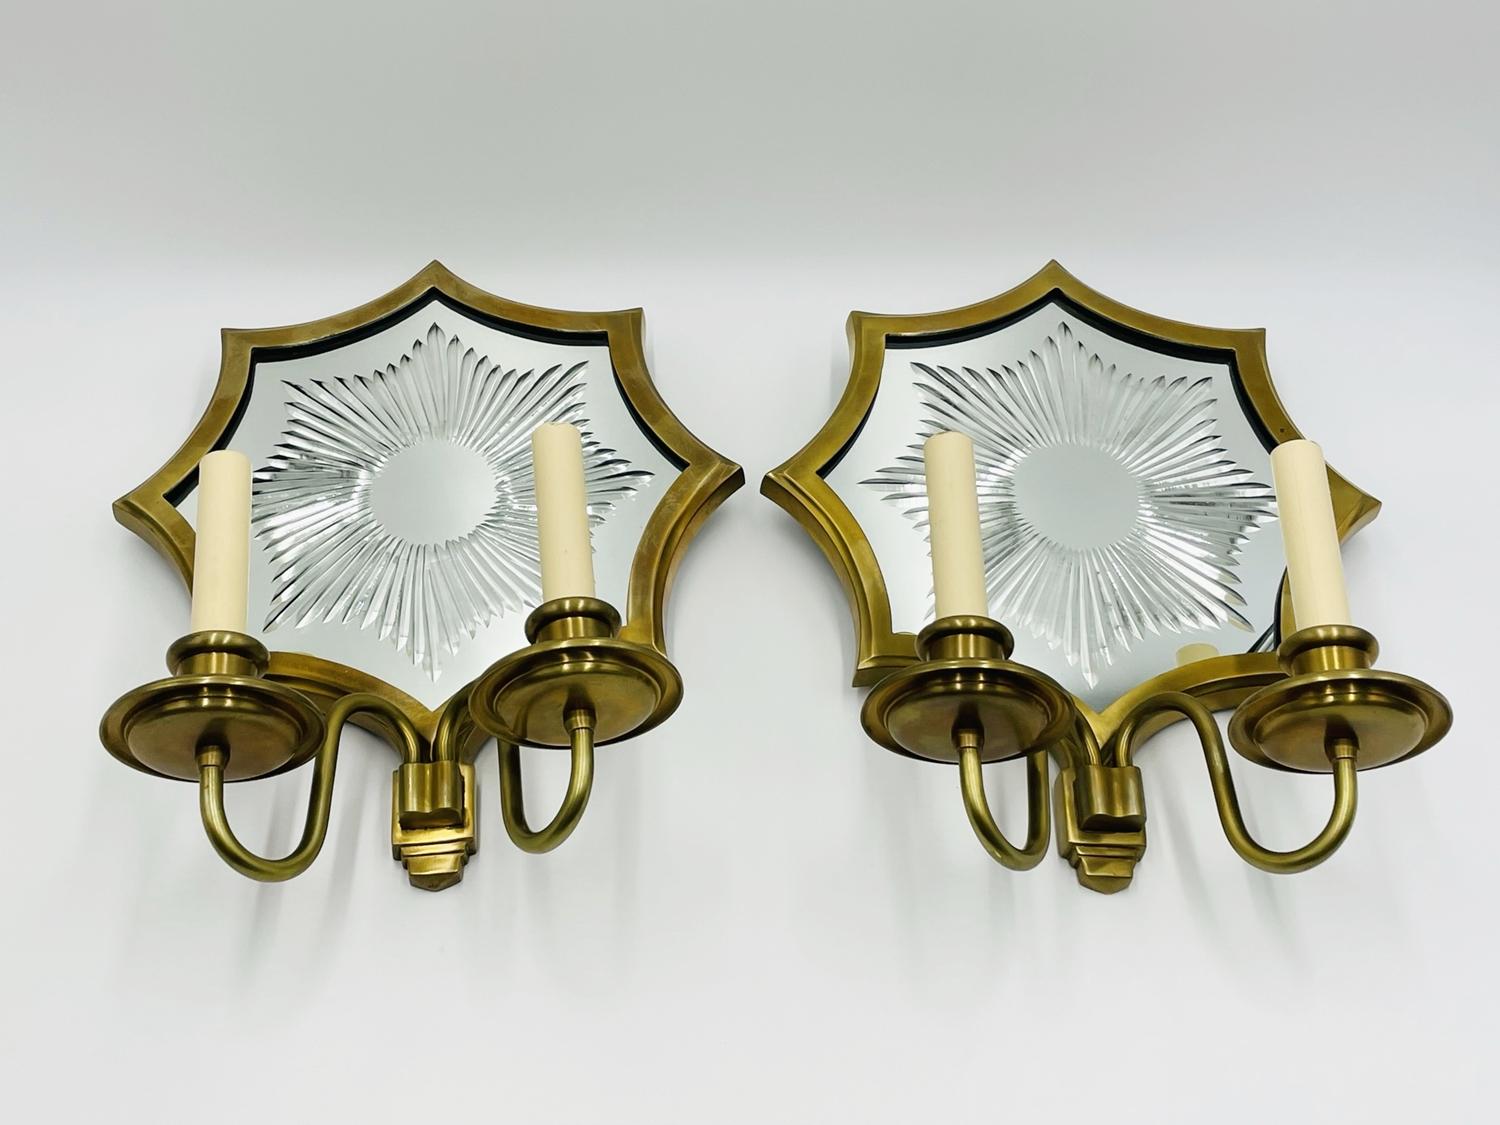 Beautiful pair of two armed sconces attributed to E. F. Caldwell in solid brass with wonderful vintage starburst mirror is sure to make a wonderful addition to your deÌcor.

Measurements:
16 inches high x 12.50 inches wide x 6 inches